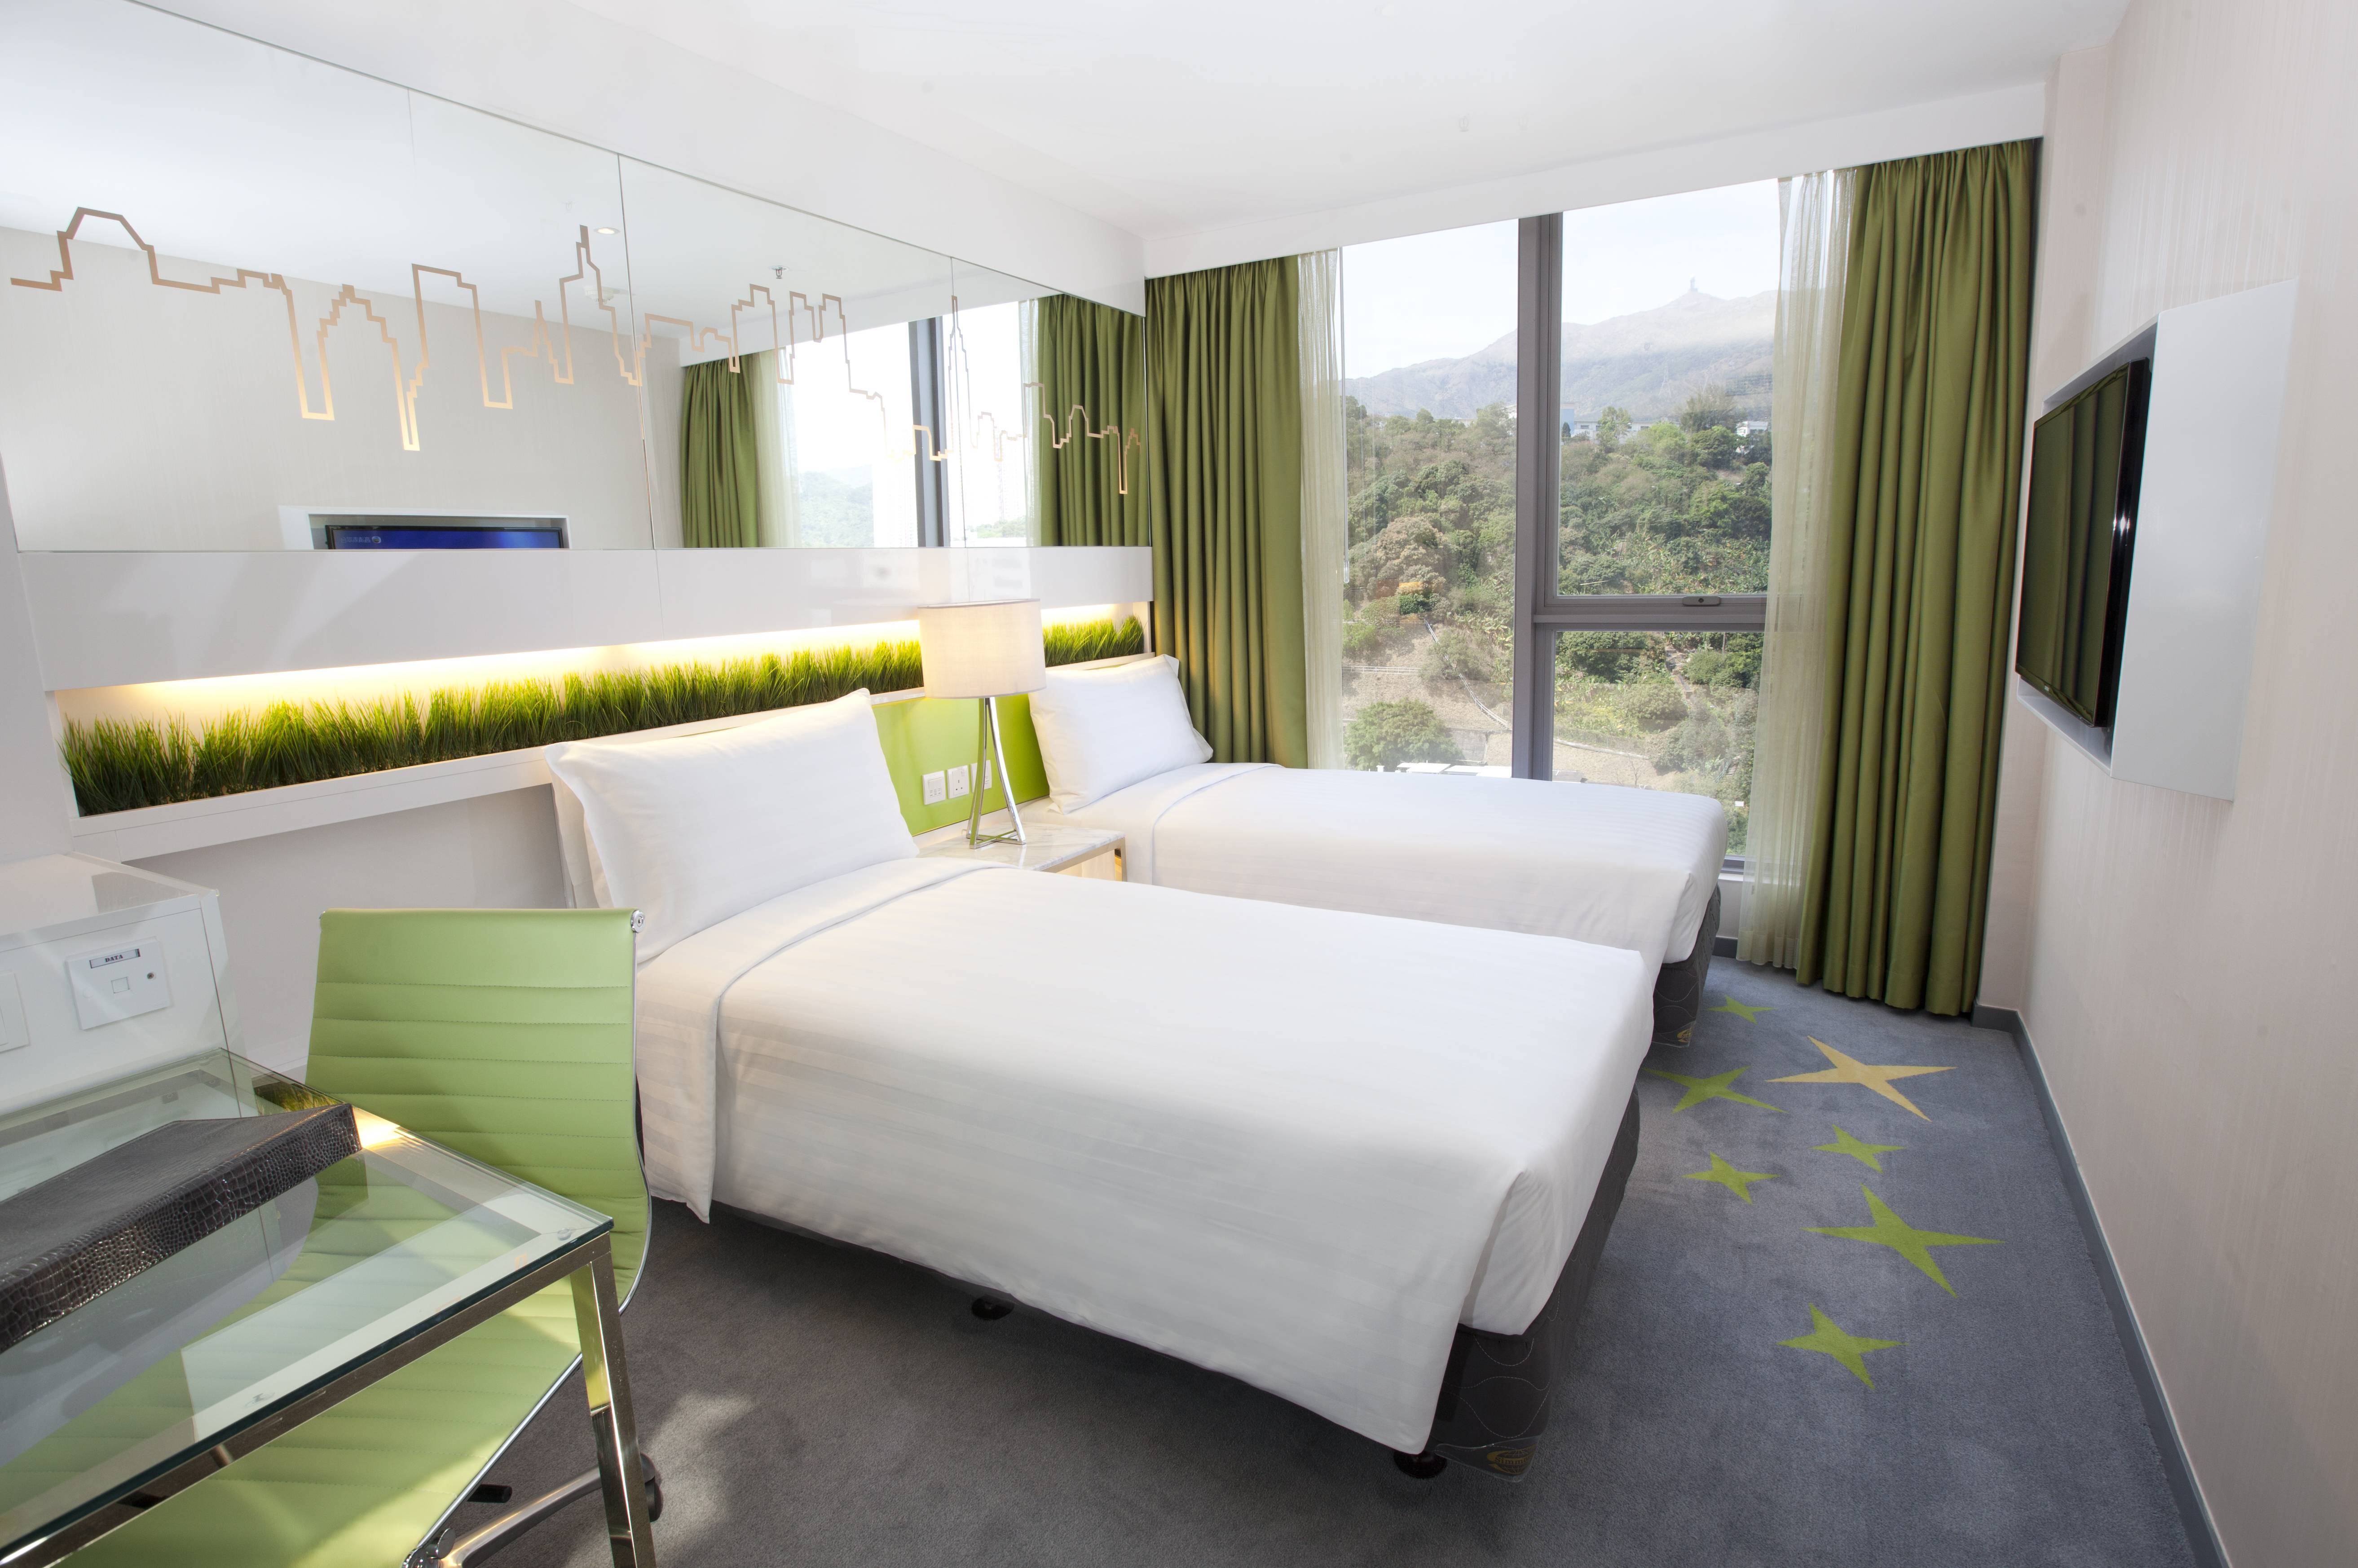 Dorsett Twin Room A fresh and modern design touch with plenty of room